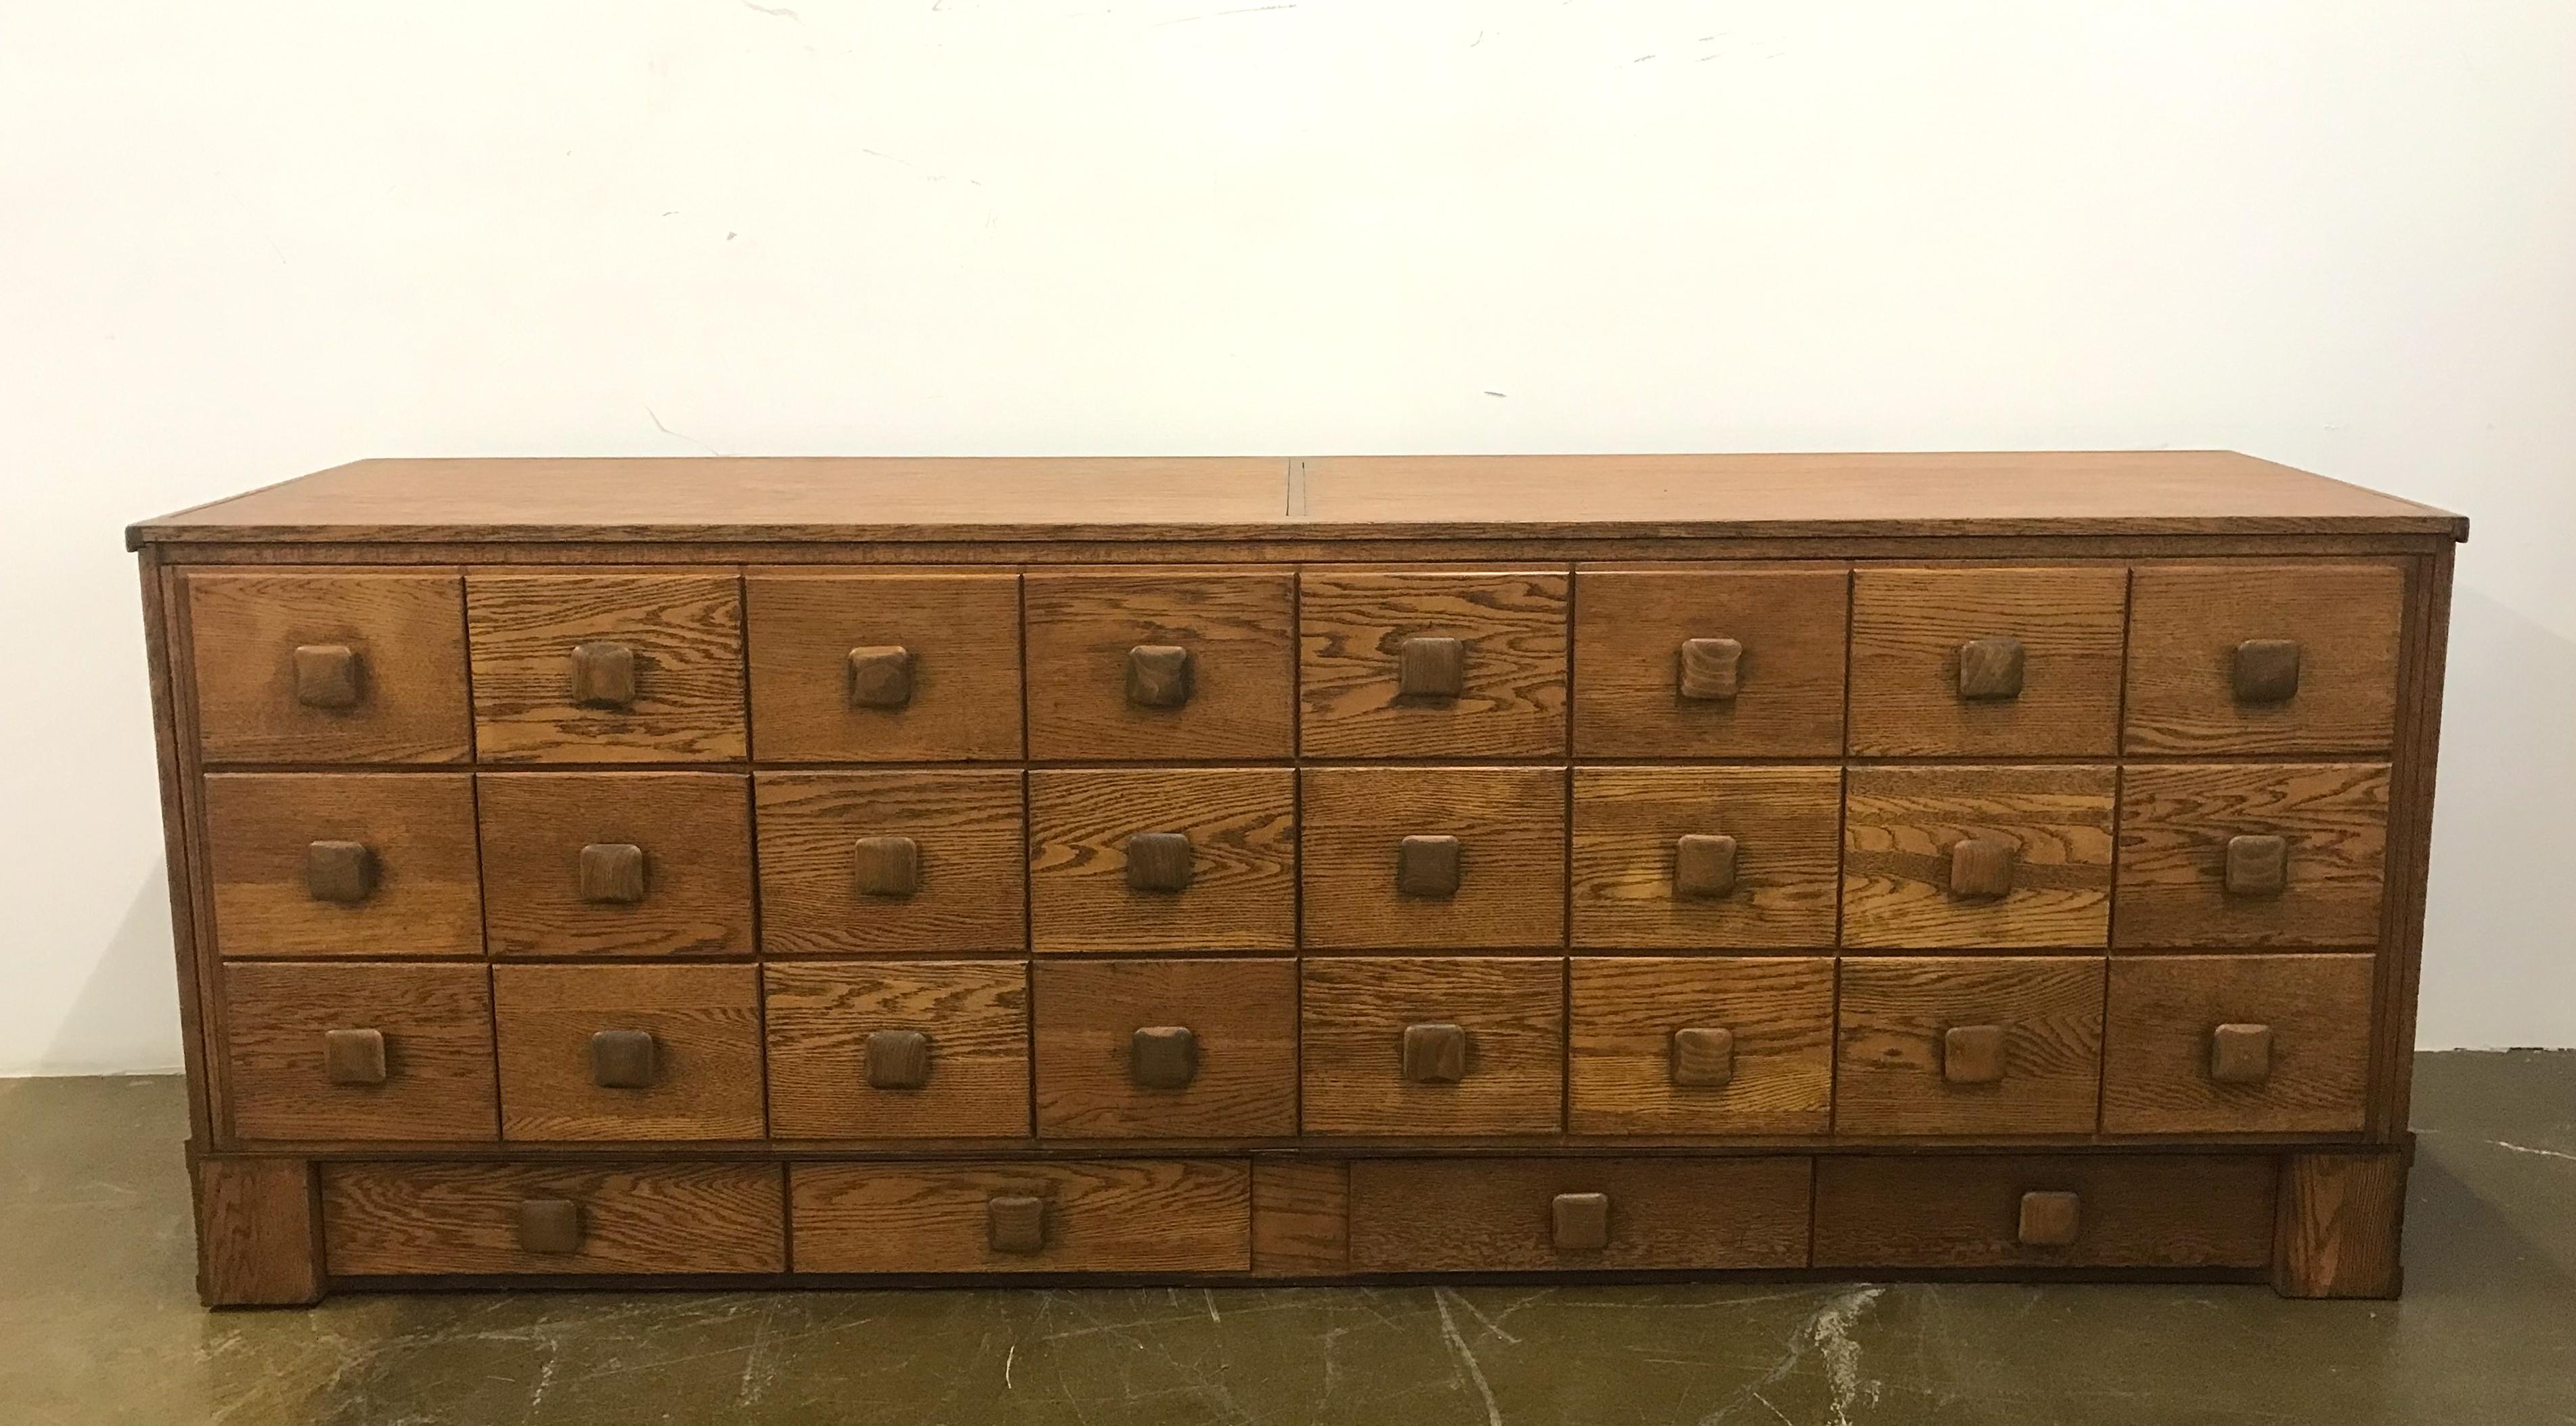 Great looking, oak display counter or storage cabinet for mens' clothing from a French haberdashery. There are a total of 28 drawers, all dovetailed and working beautifully. Each drawer has a masculine square wooden pull.
This used to have glass